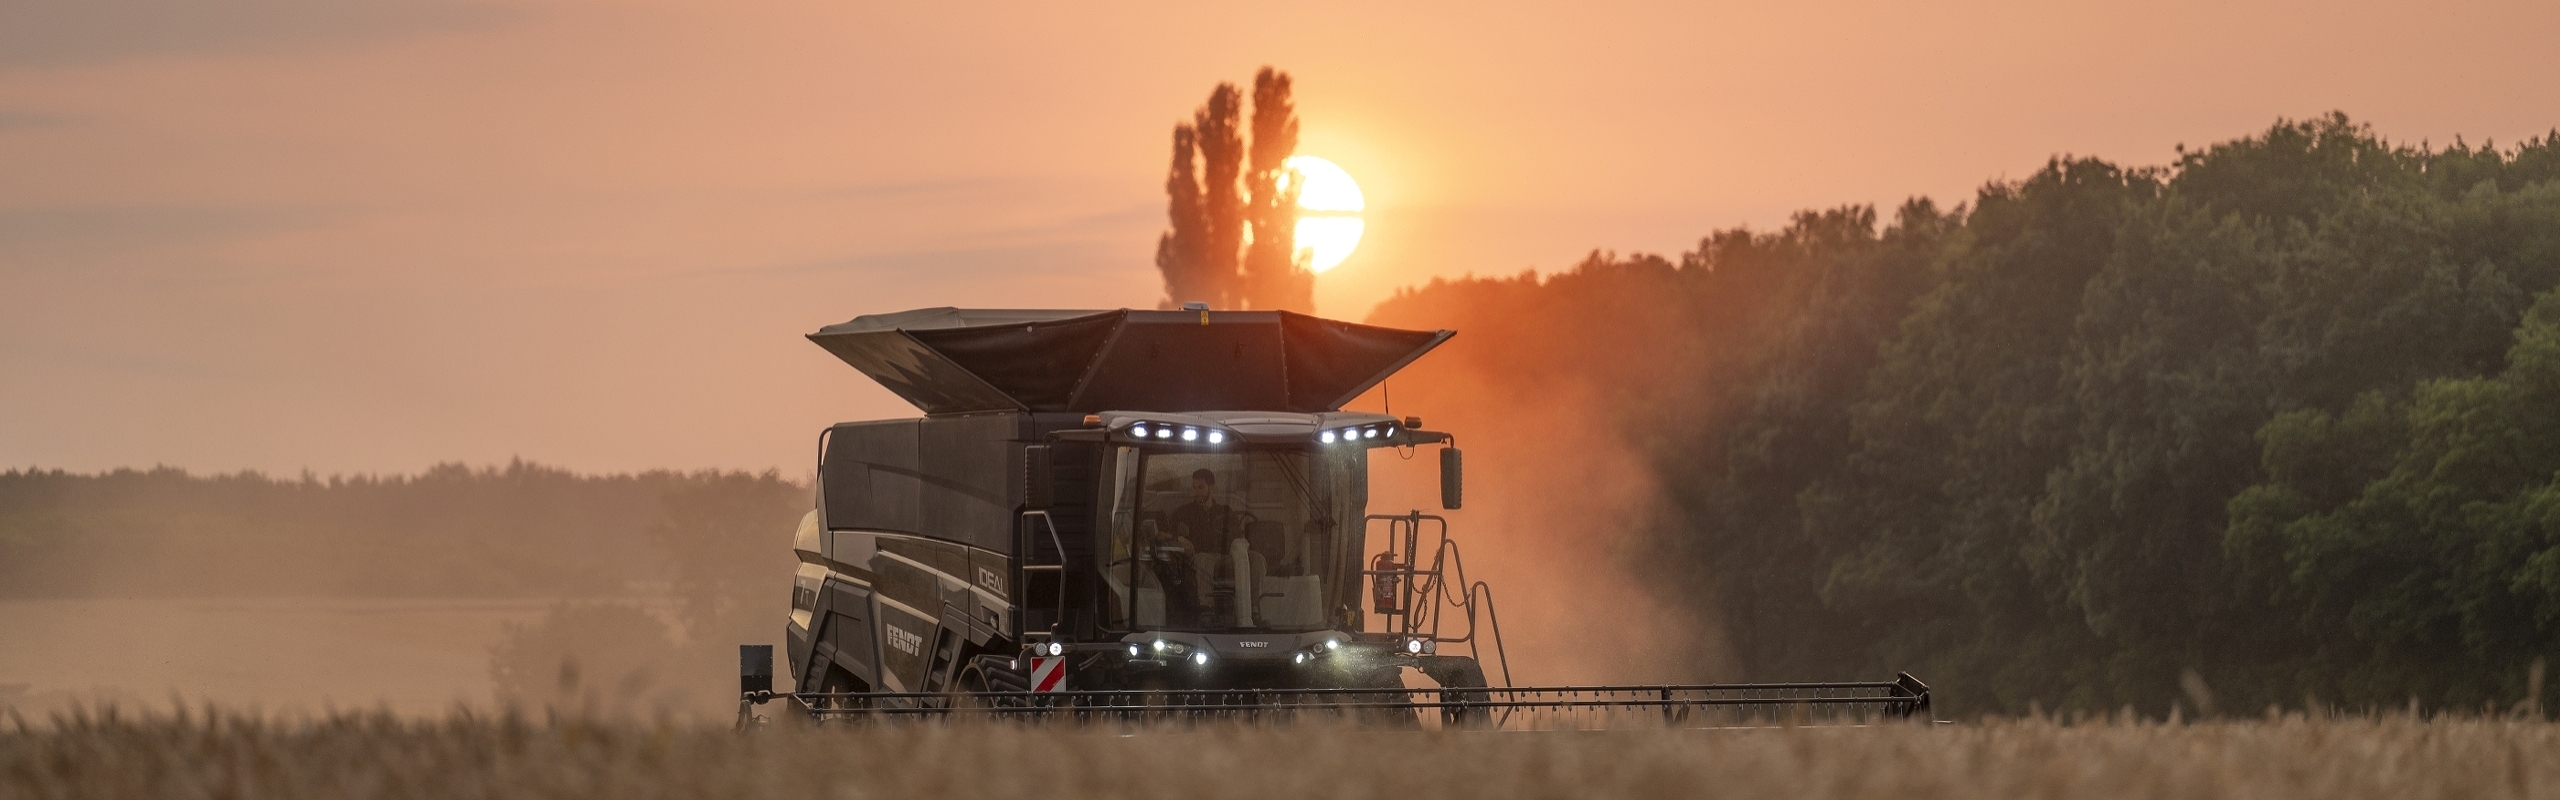 Fendt IDEAL 10 T in the field at sunset